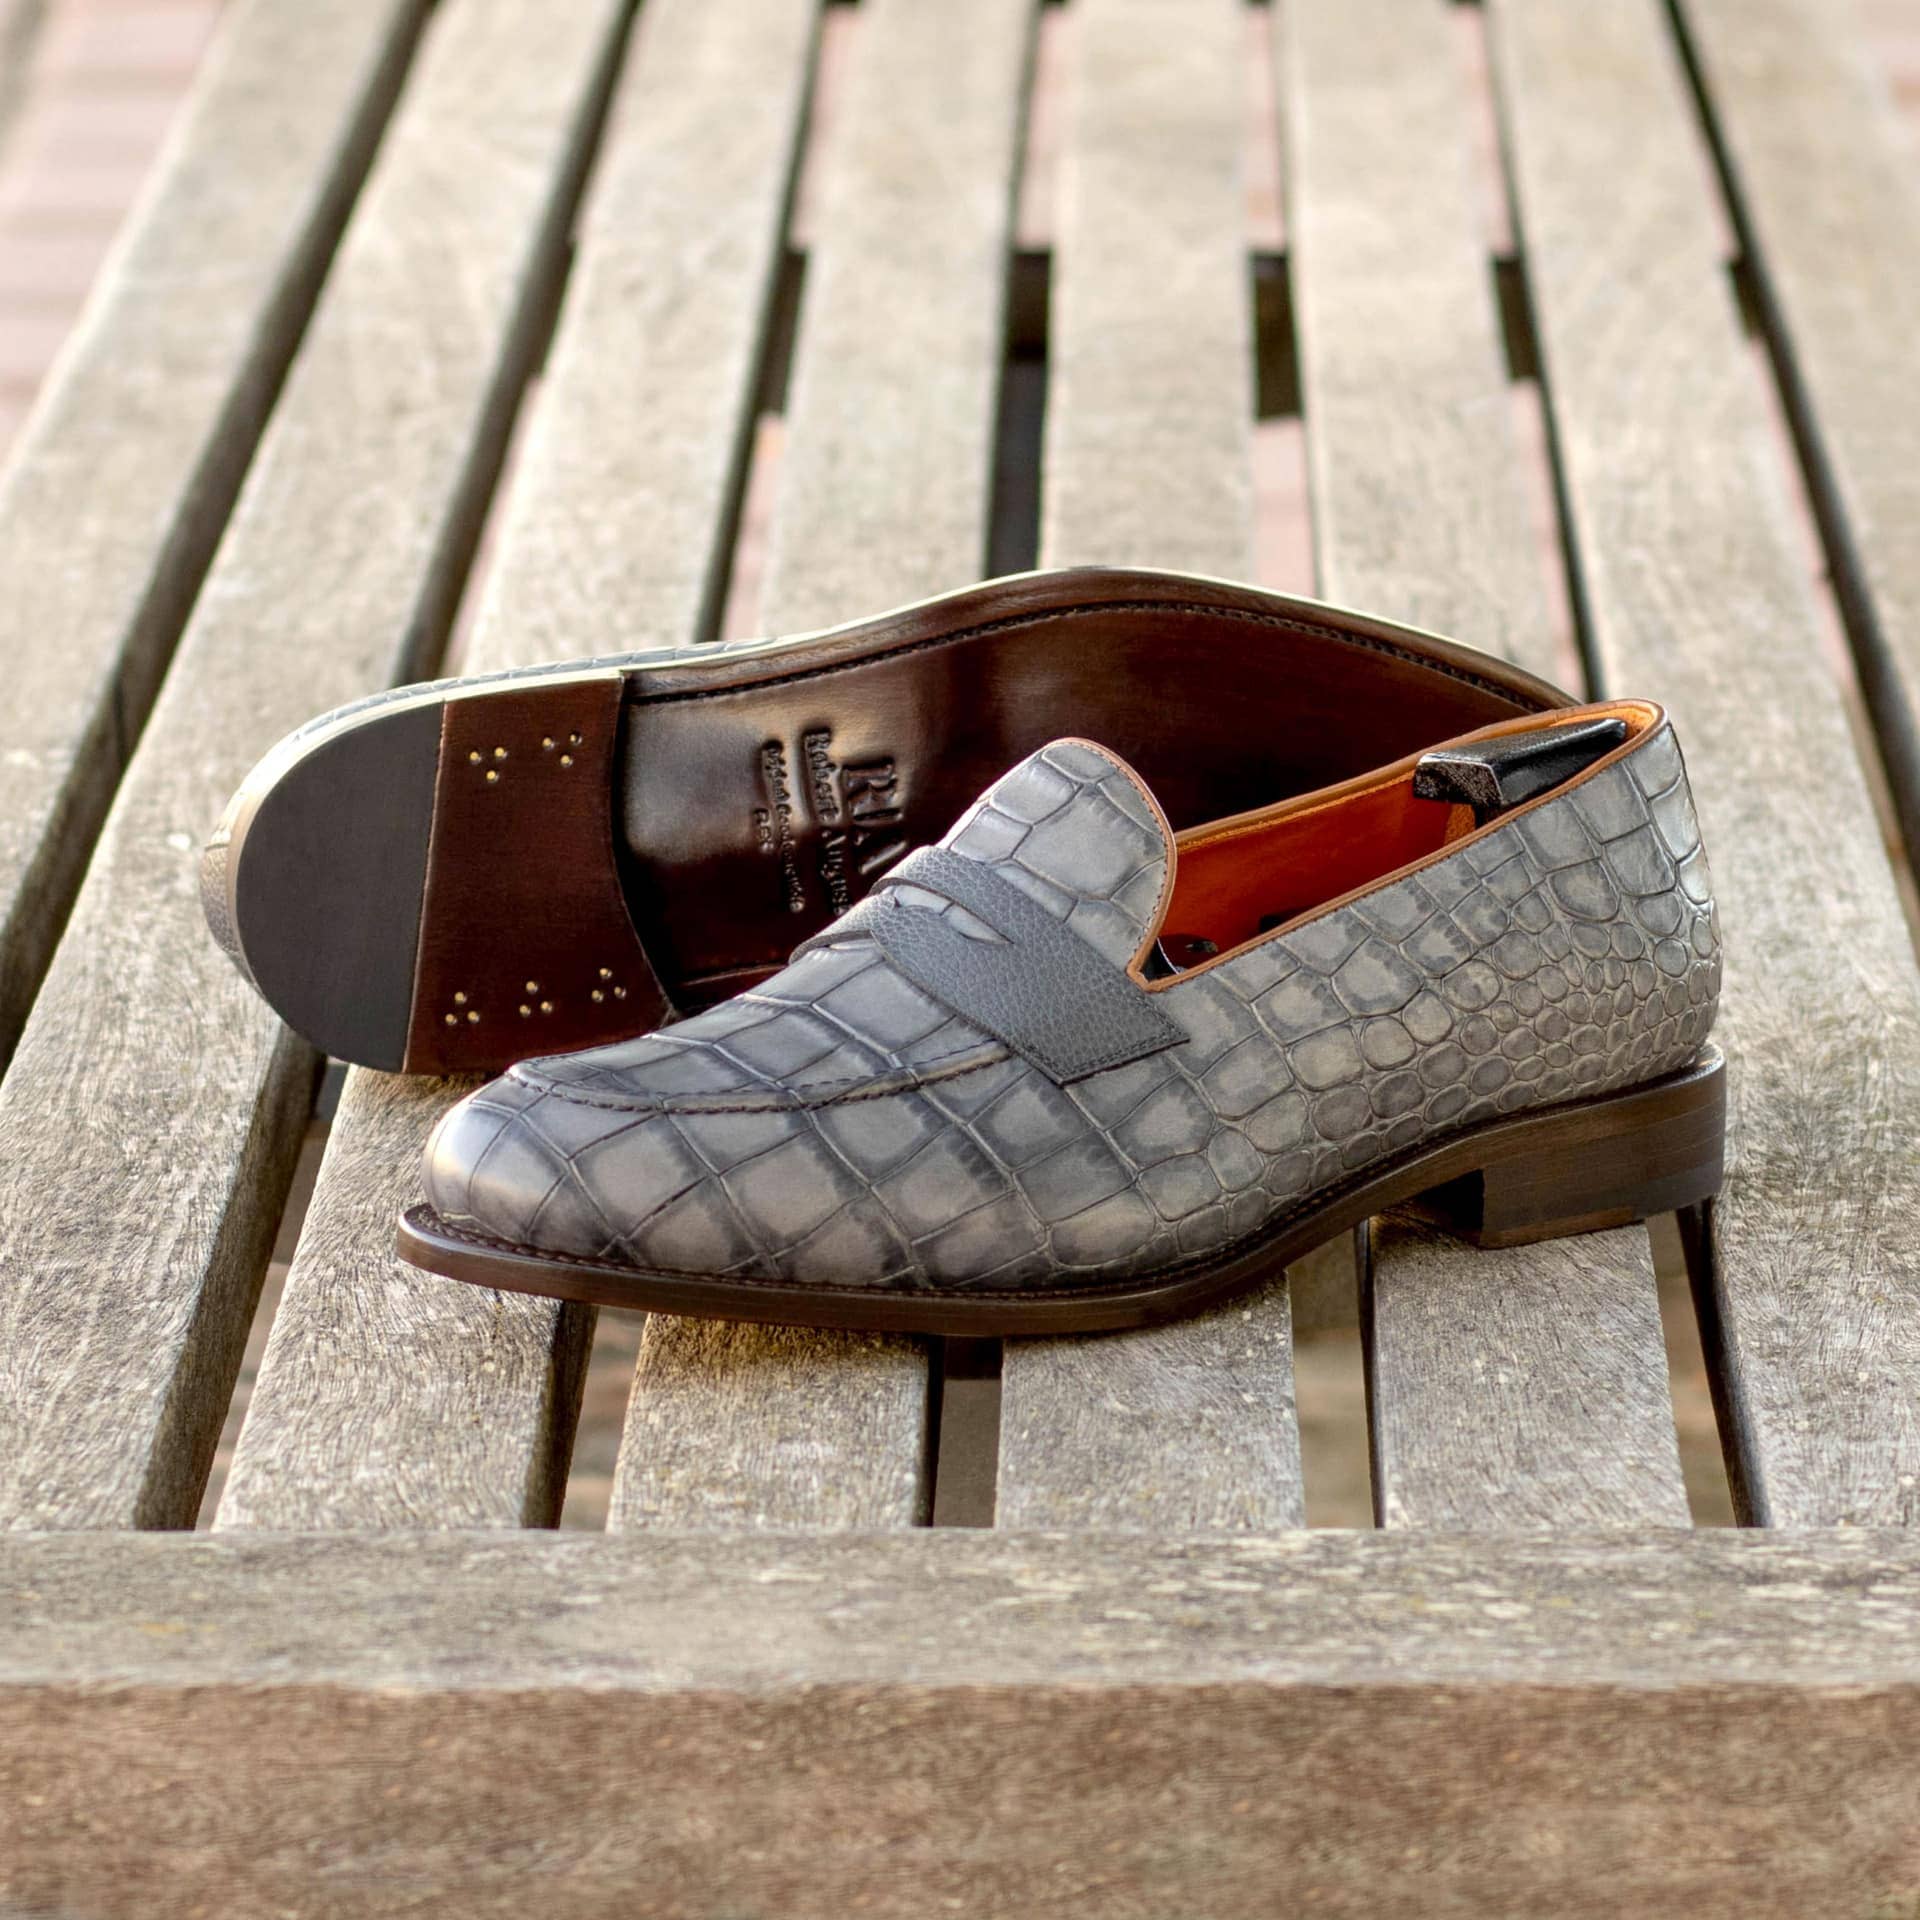 Introducing The Grand Ave. Loafer No. 8200: A Masterpiece in Men's Footwear